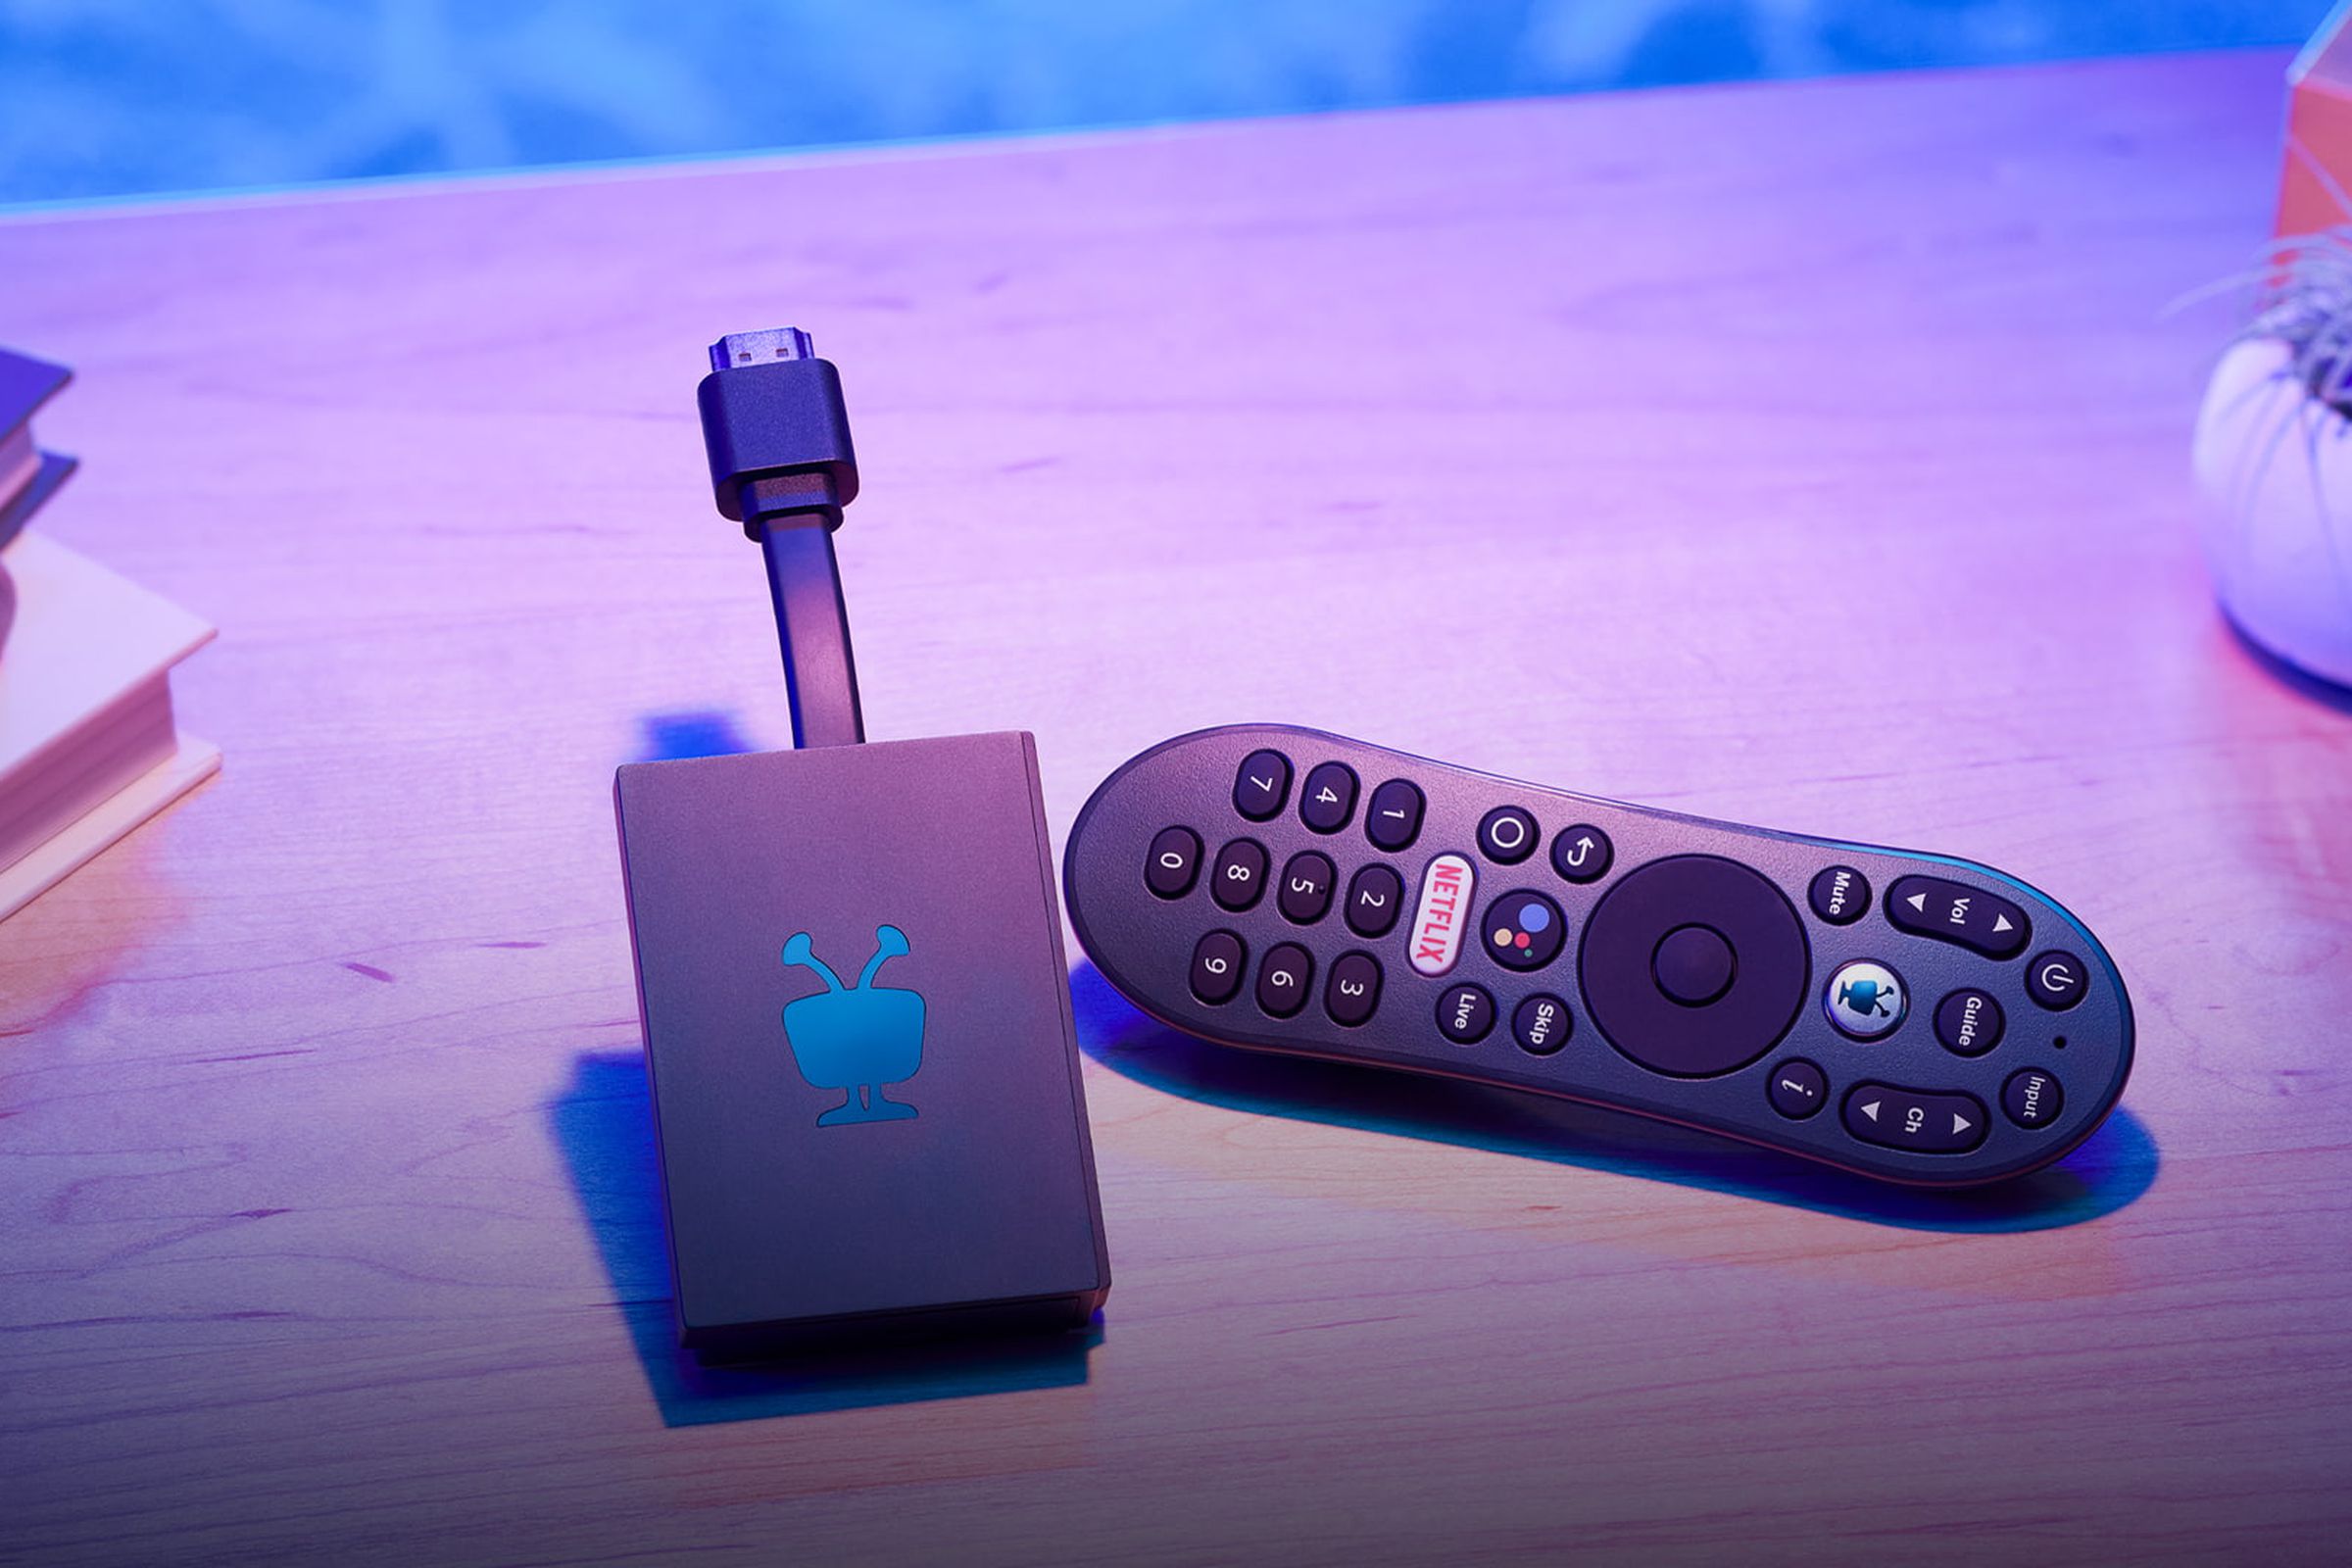 TiVo’s Stream 4K is an HDMI dongle that plugs into the back of your TV.